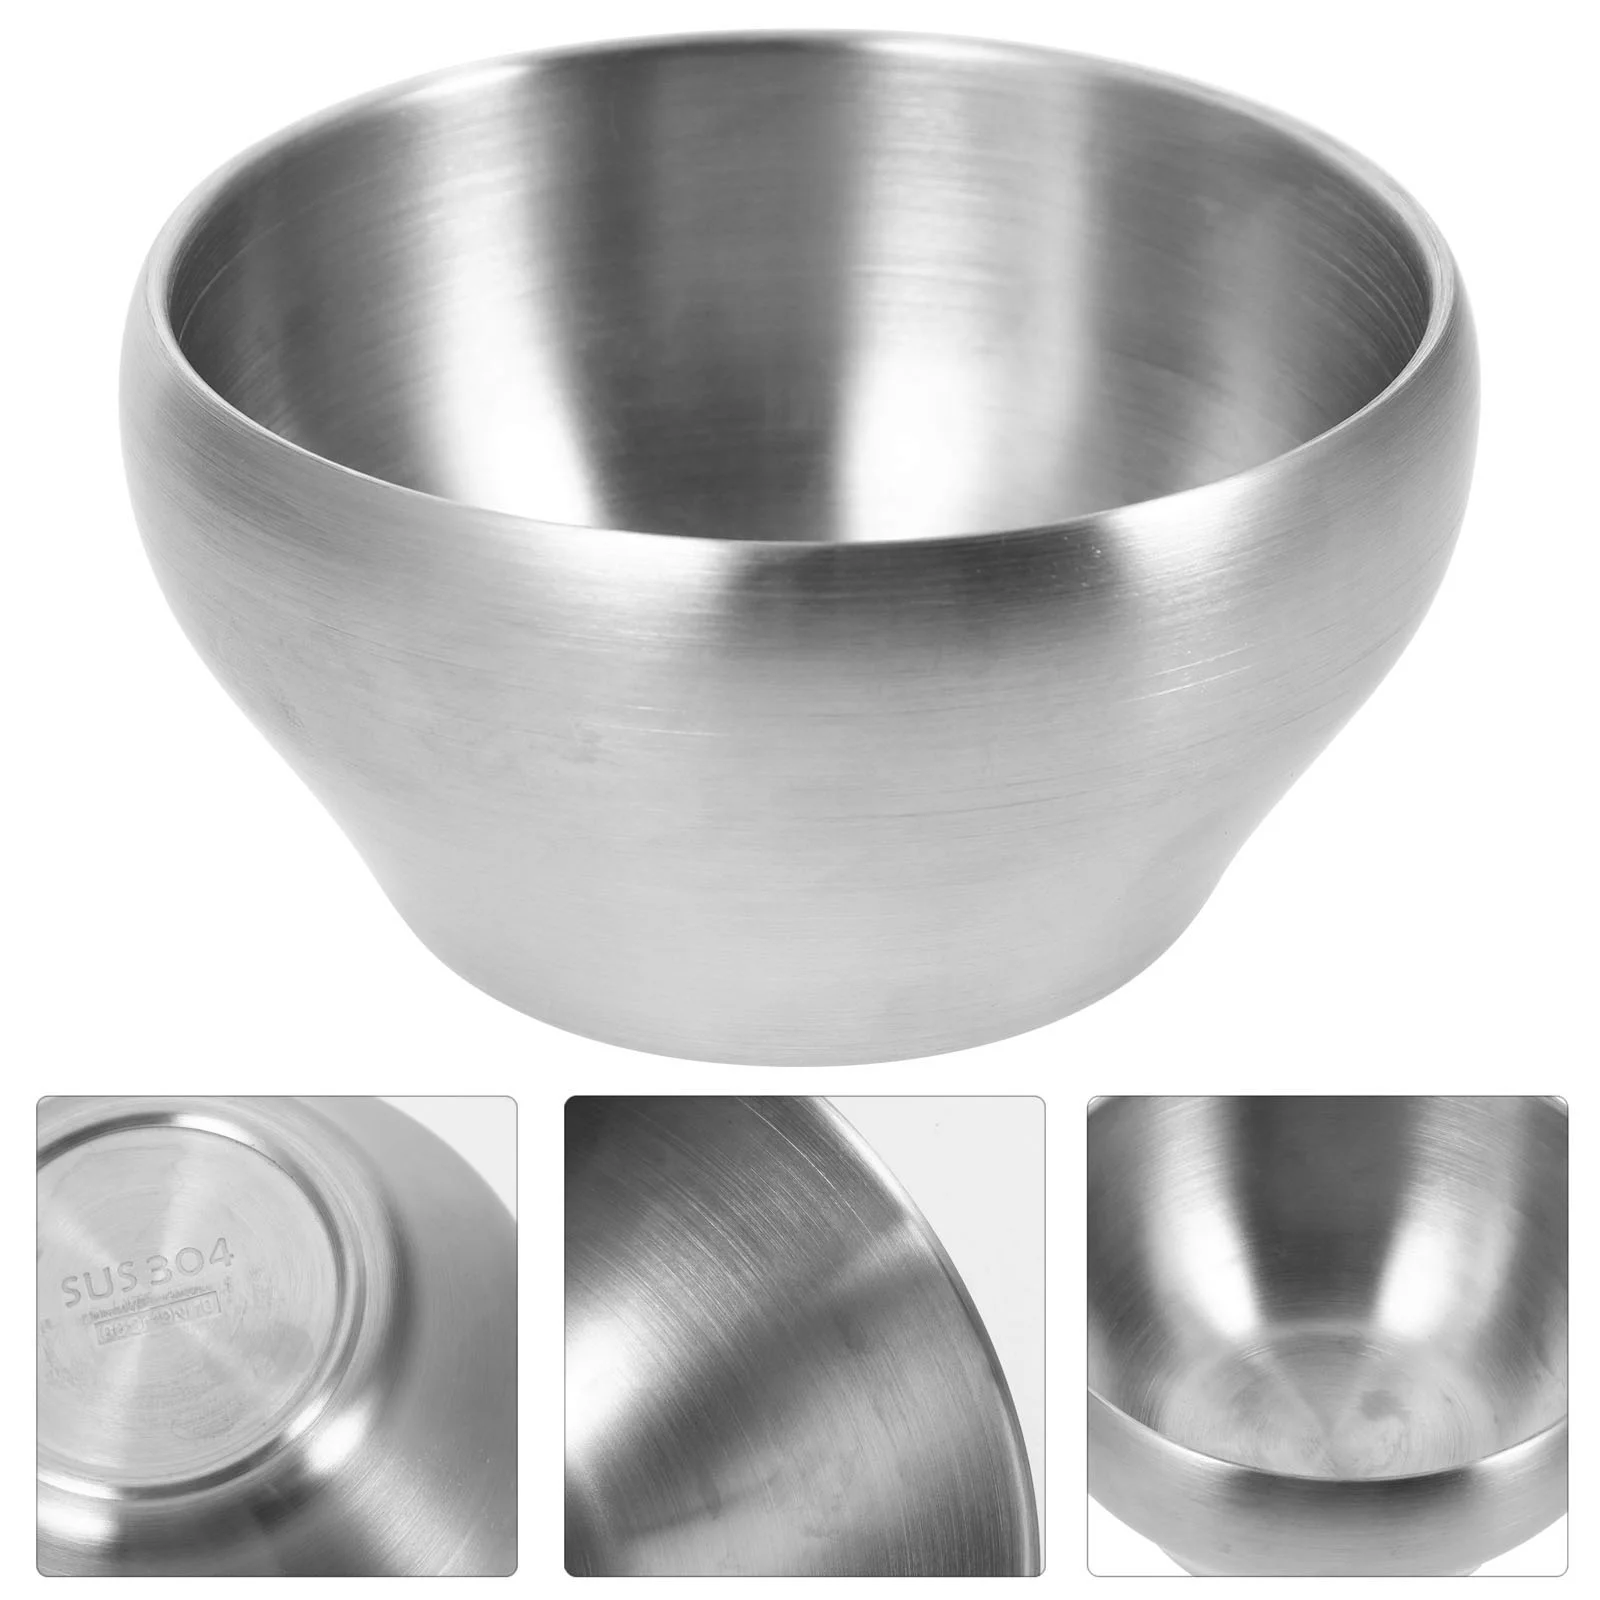 

Bowl Bowls Soup Stainless Serving Steel Salad Pasta Cereal Noodle Insulated Ramen Miso Mixing Metal Snack Rice Prep Dipping